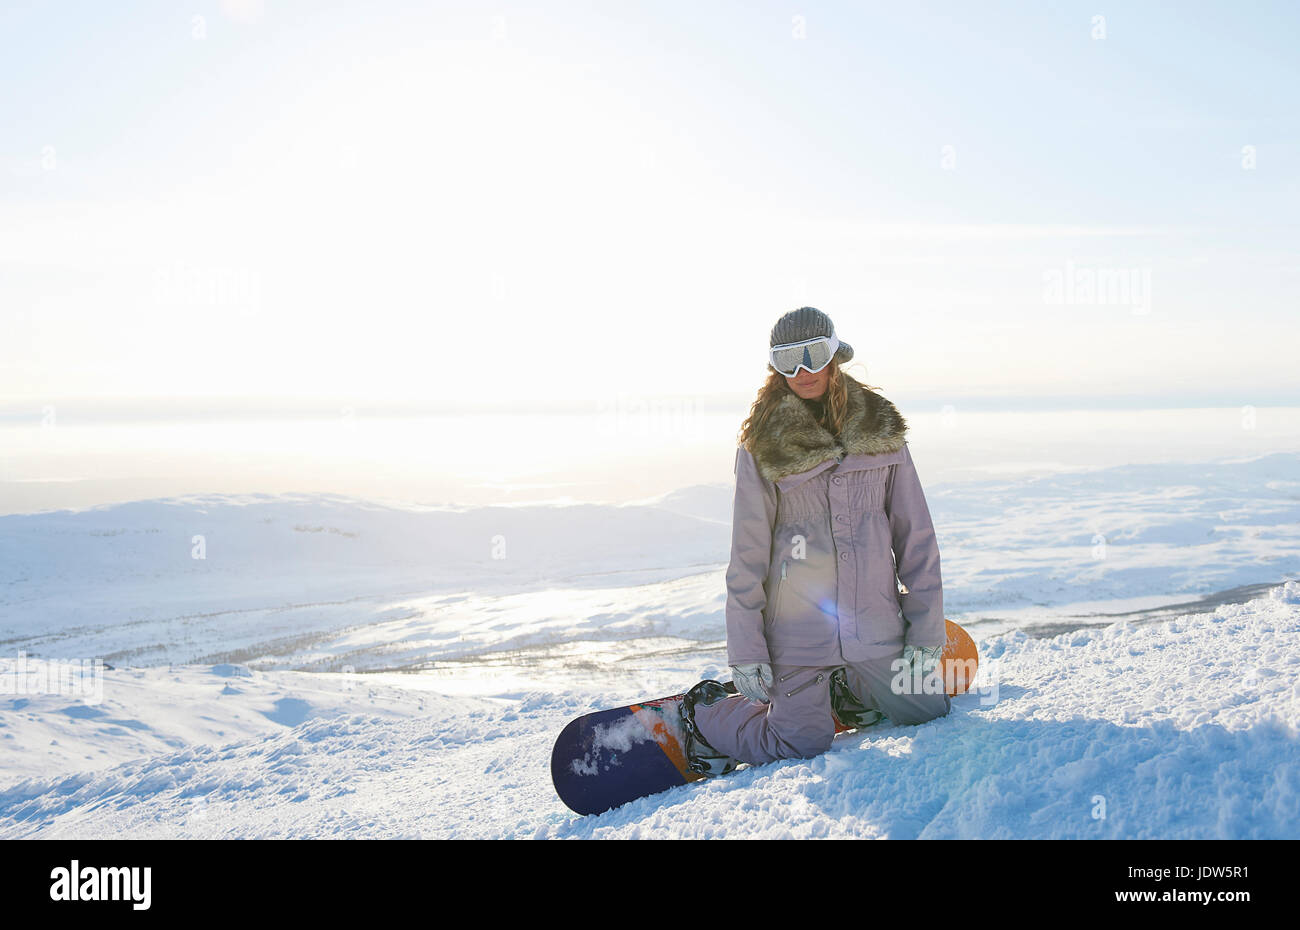 Snowboarder kneeling in snow, Are, Sweden Stock Photo